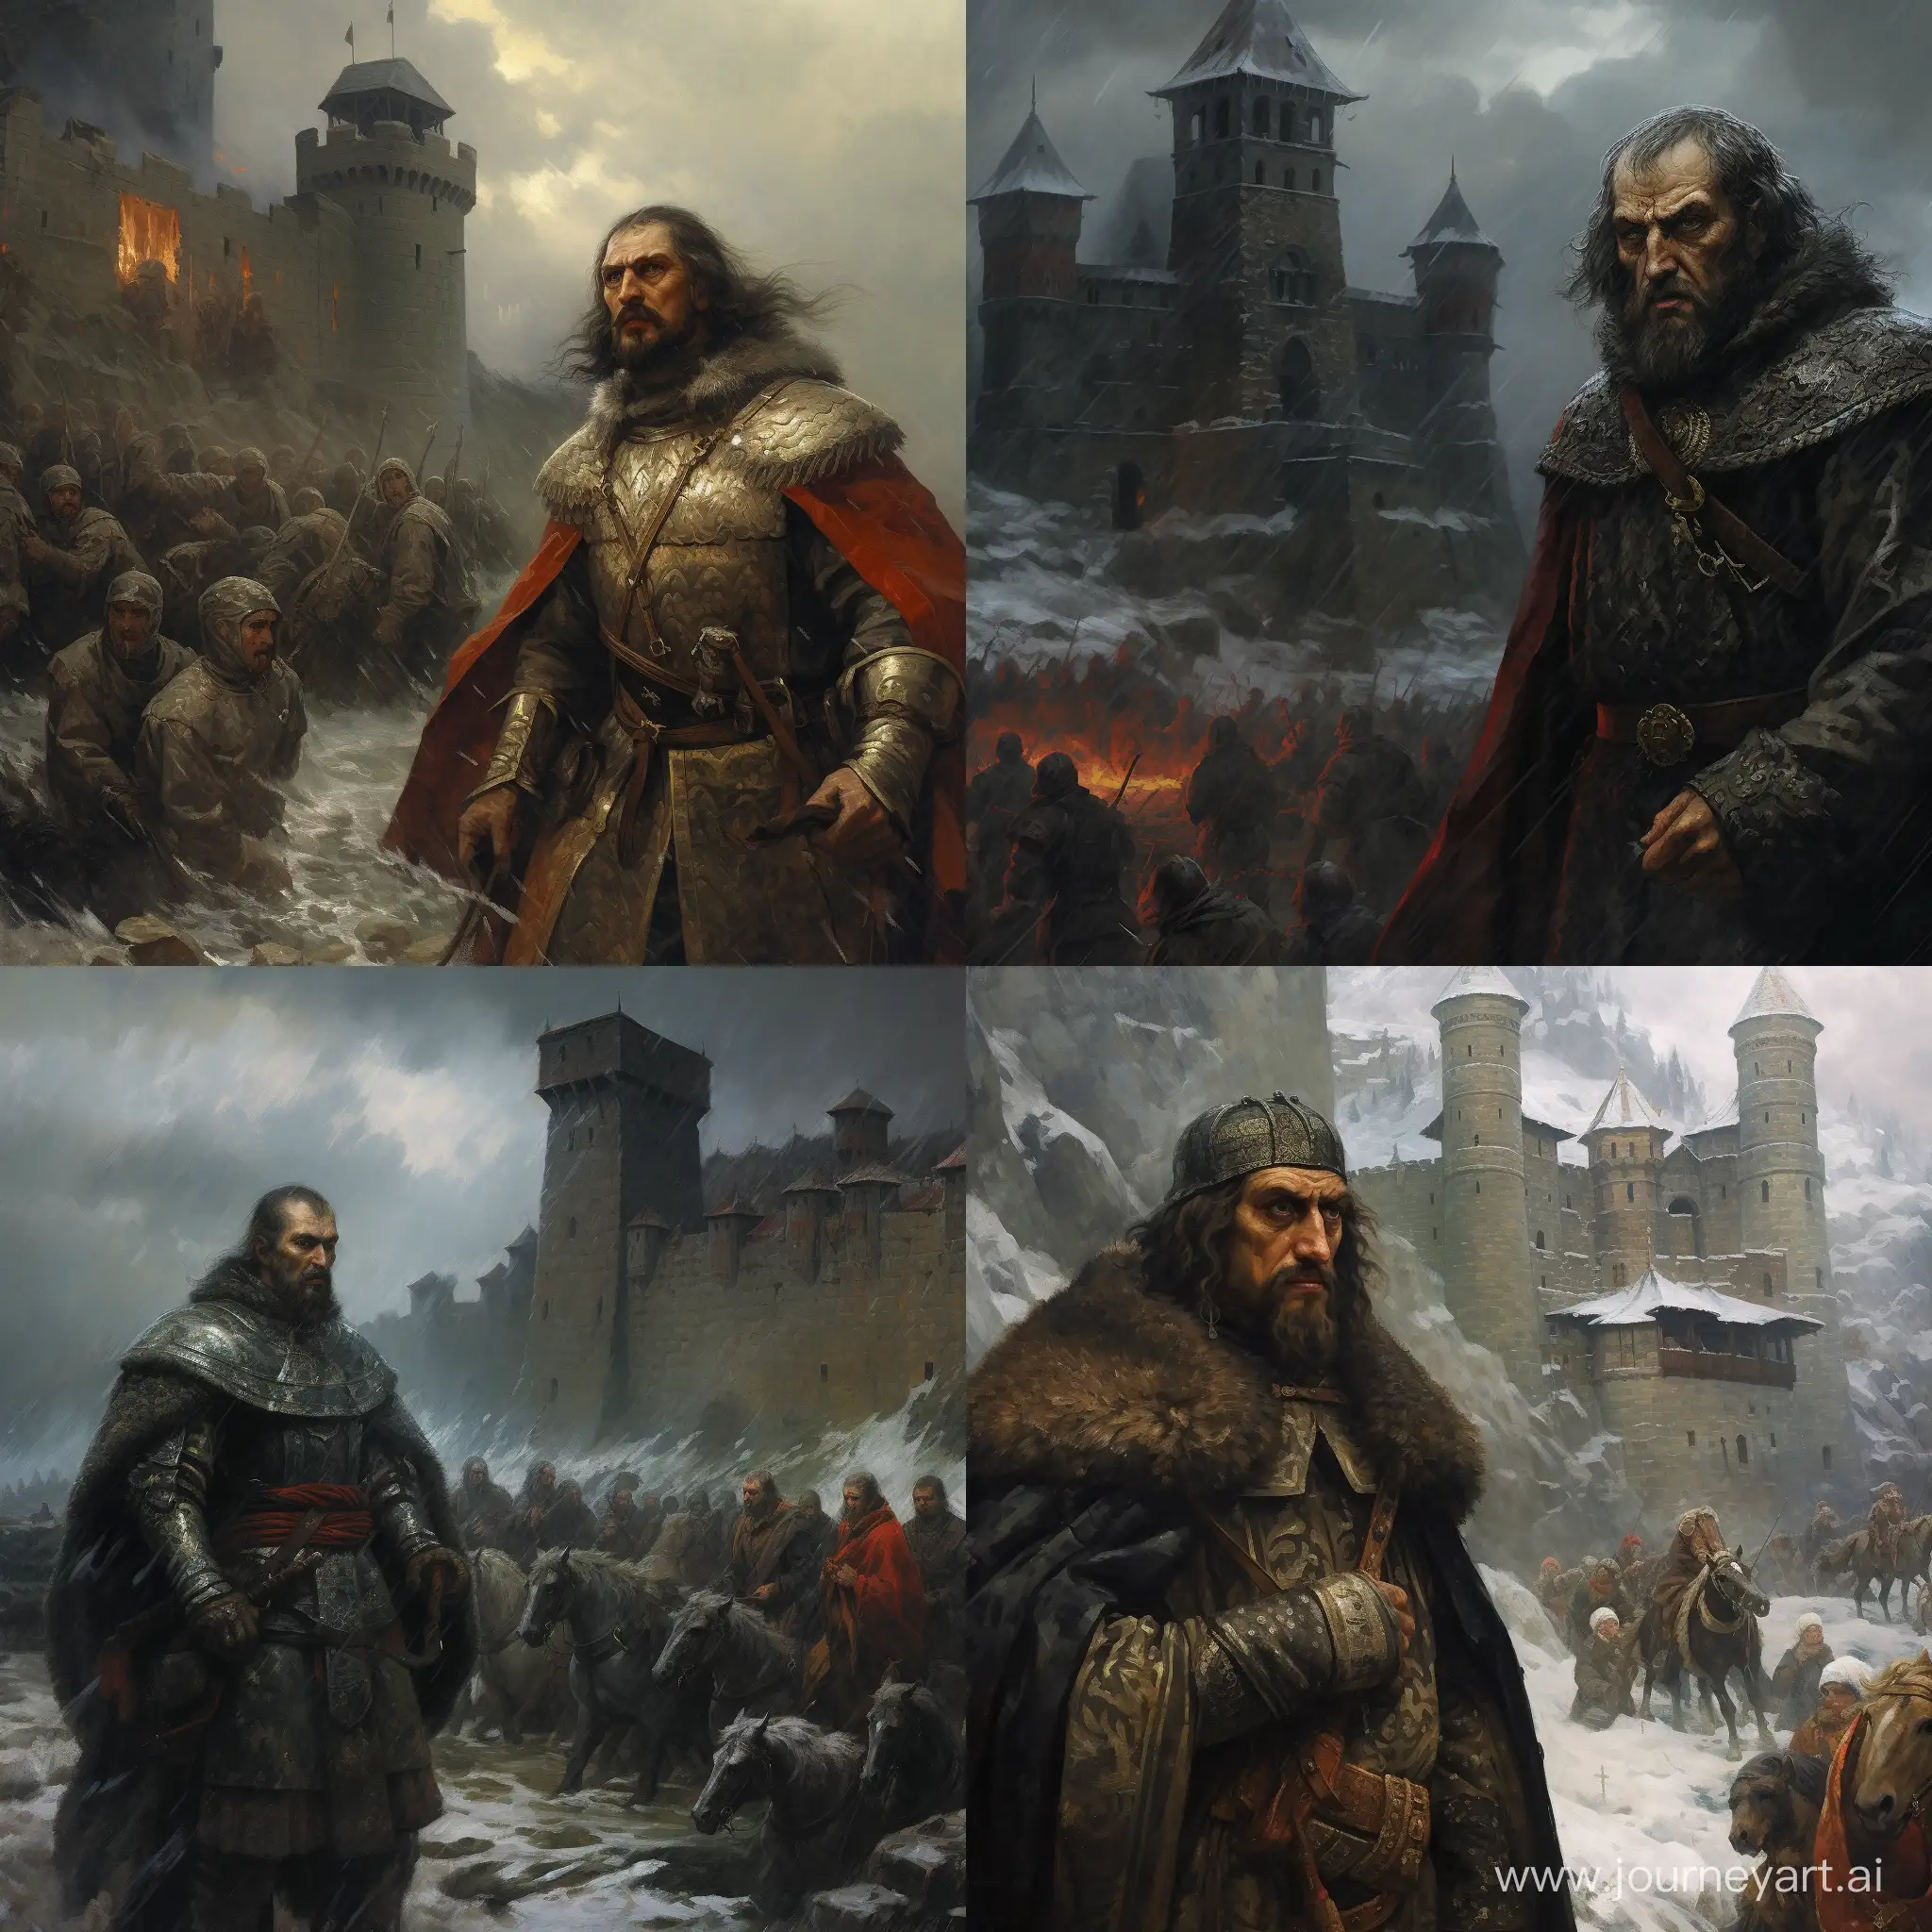 Ivan-the-Terrible-Conquers-Lithuanian-Fortress-in-Epic-Battle